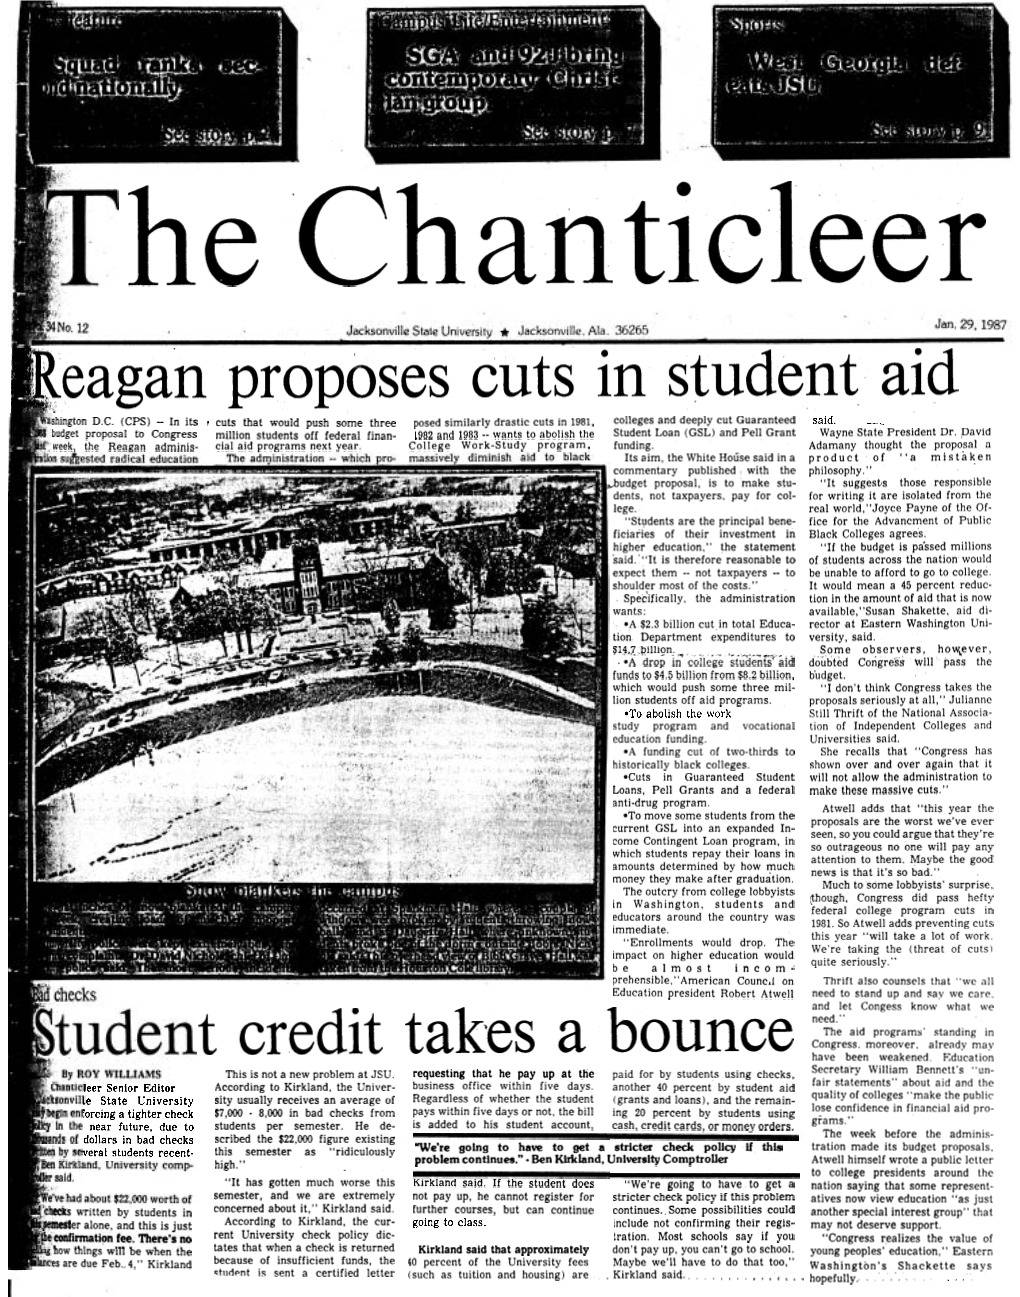 Beagan Proposes Cuts in Student Aid T Credit Takes a Bounce